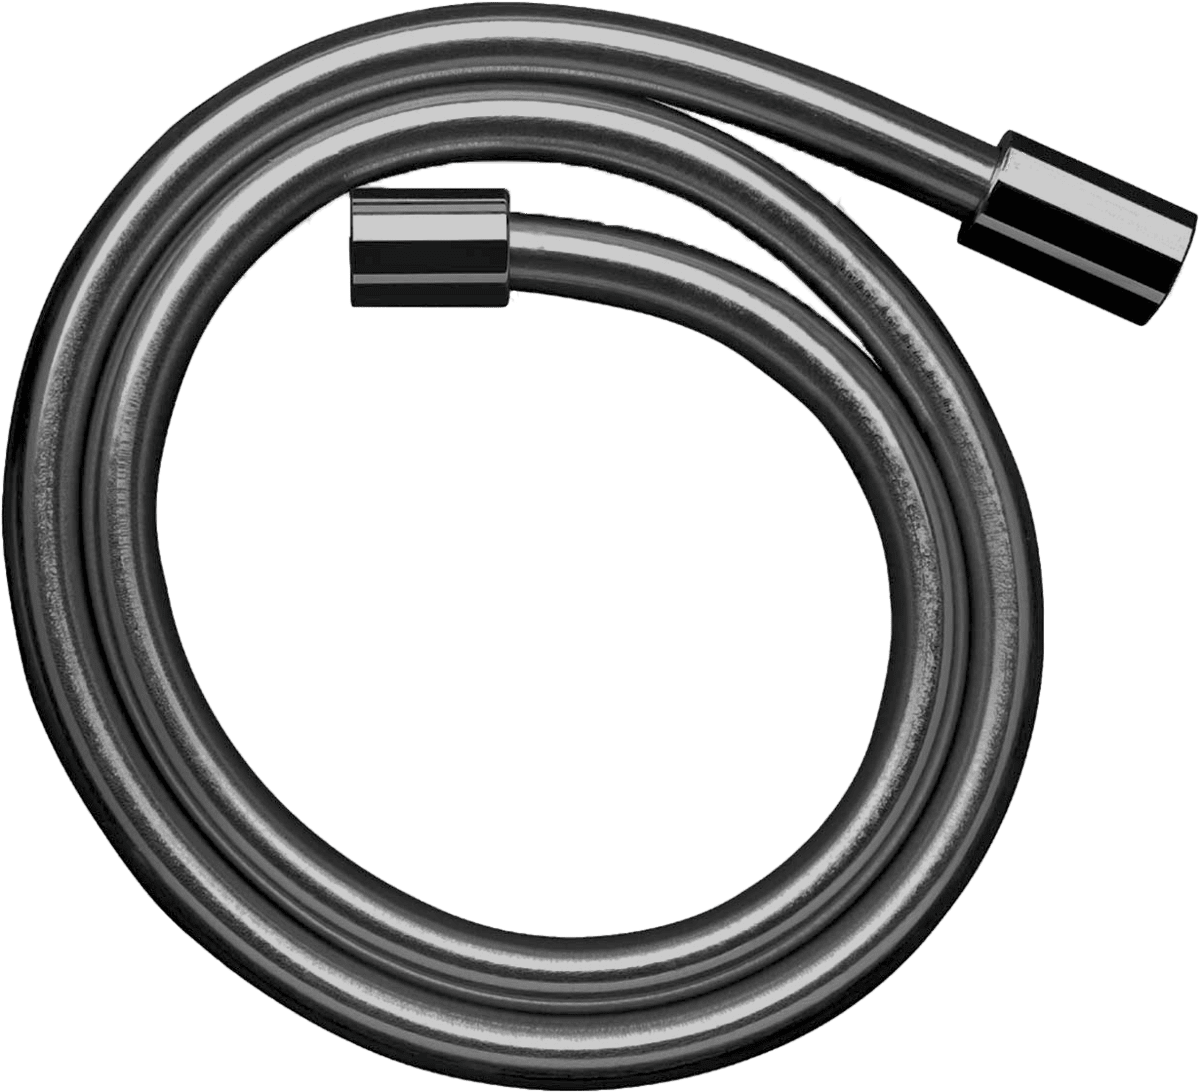 Picture of HANSGROHE AXOR Starck Metal effect shower hose 2.00 m with cylindrical nuts #28284330 - Polished Black Chrome